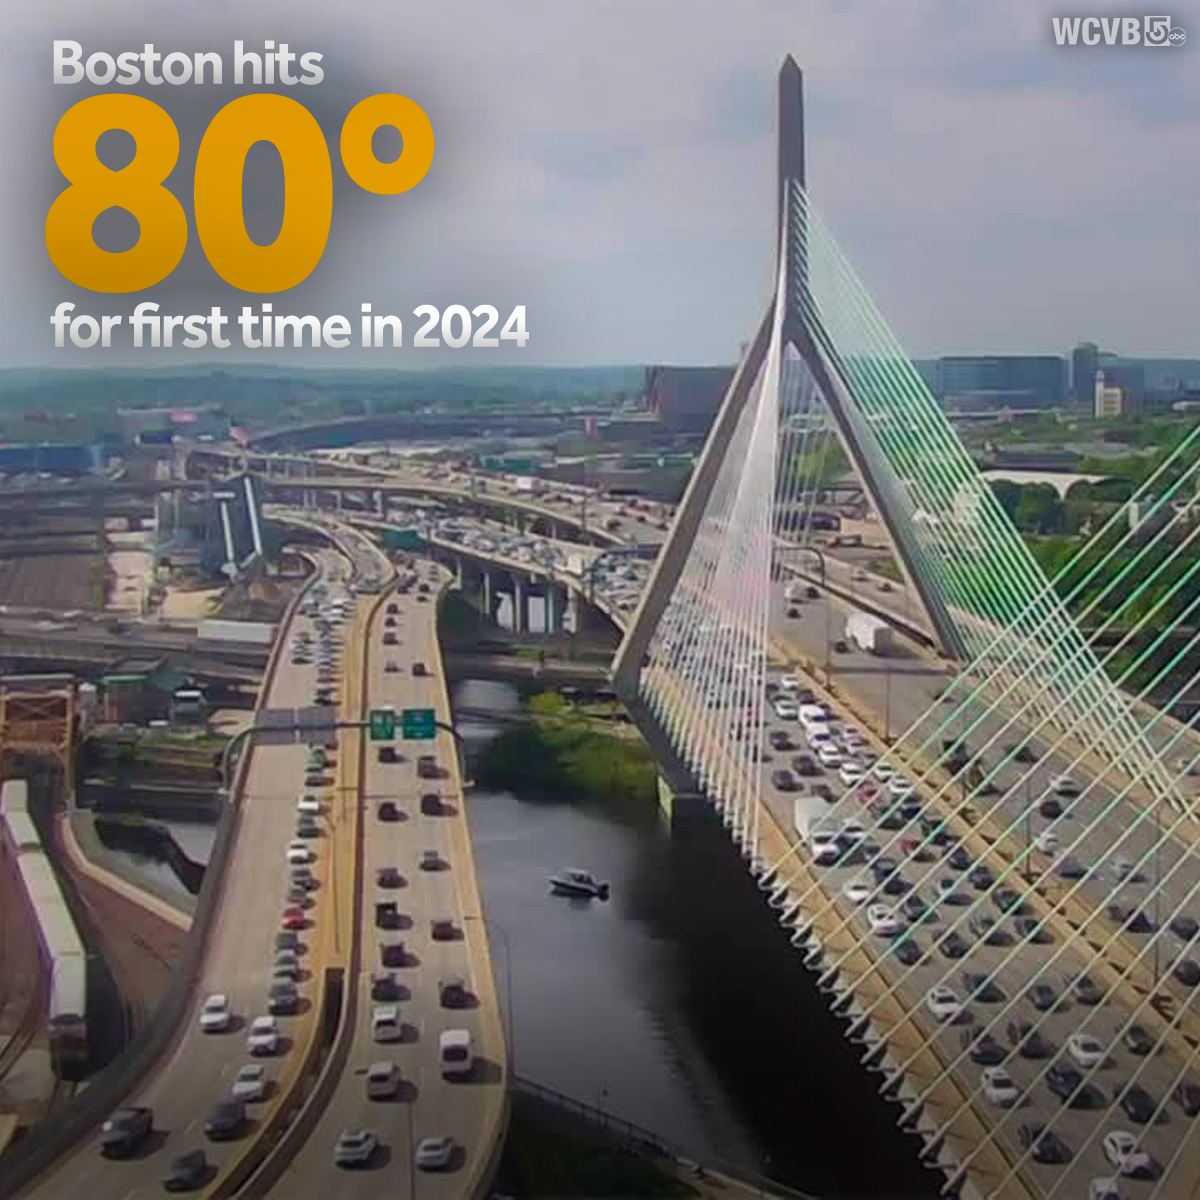 It might not be a 'summah scorchah' just yet, but Boston just hit 80º for the first time this year. We haven't seen a day this warm since late October.